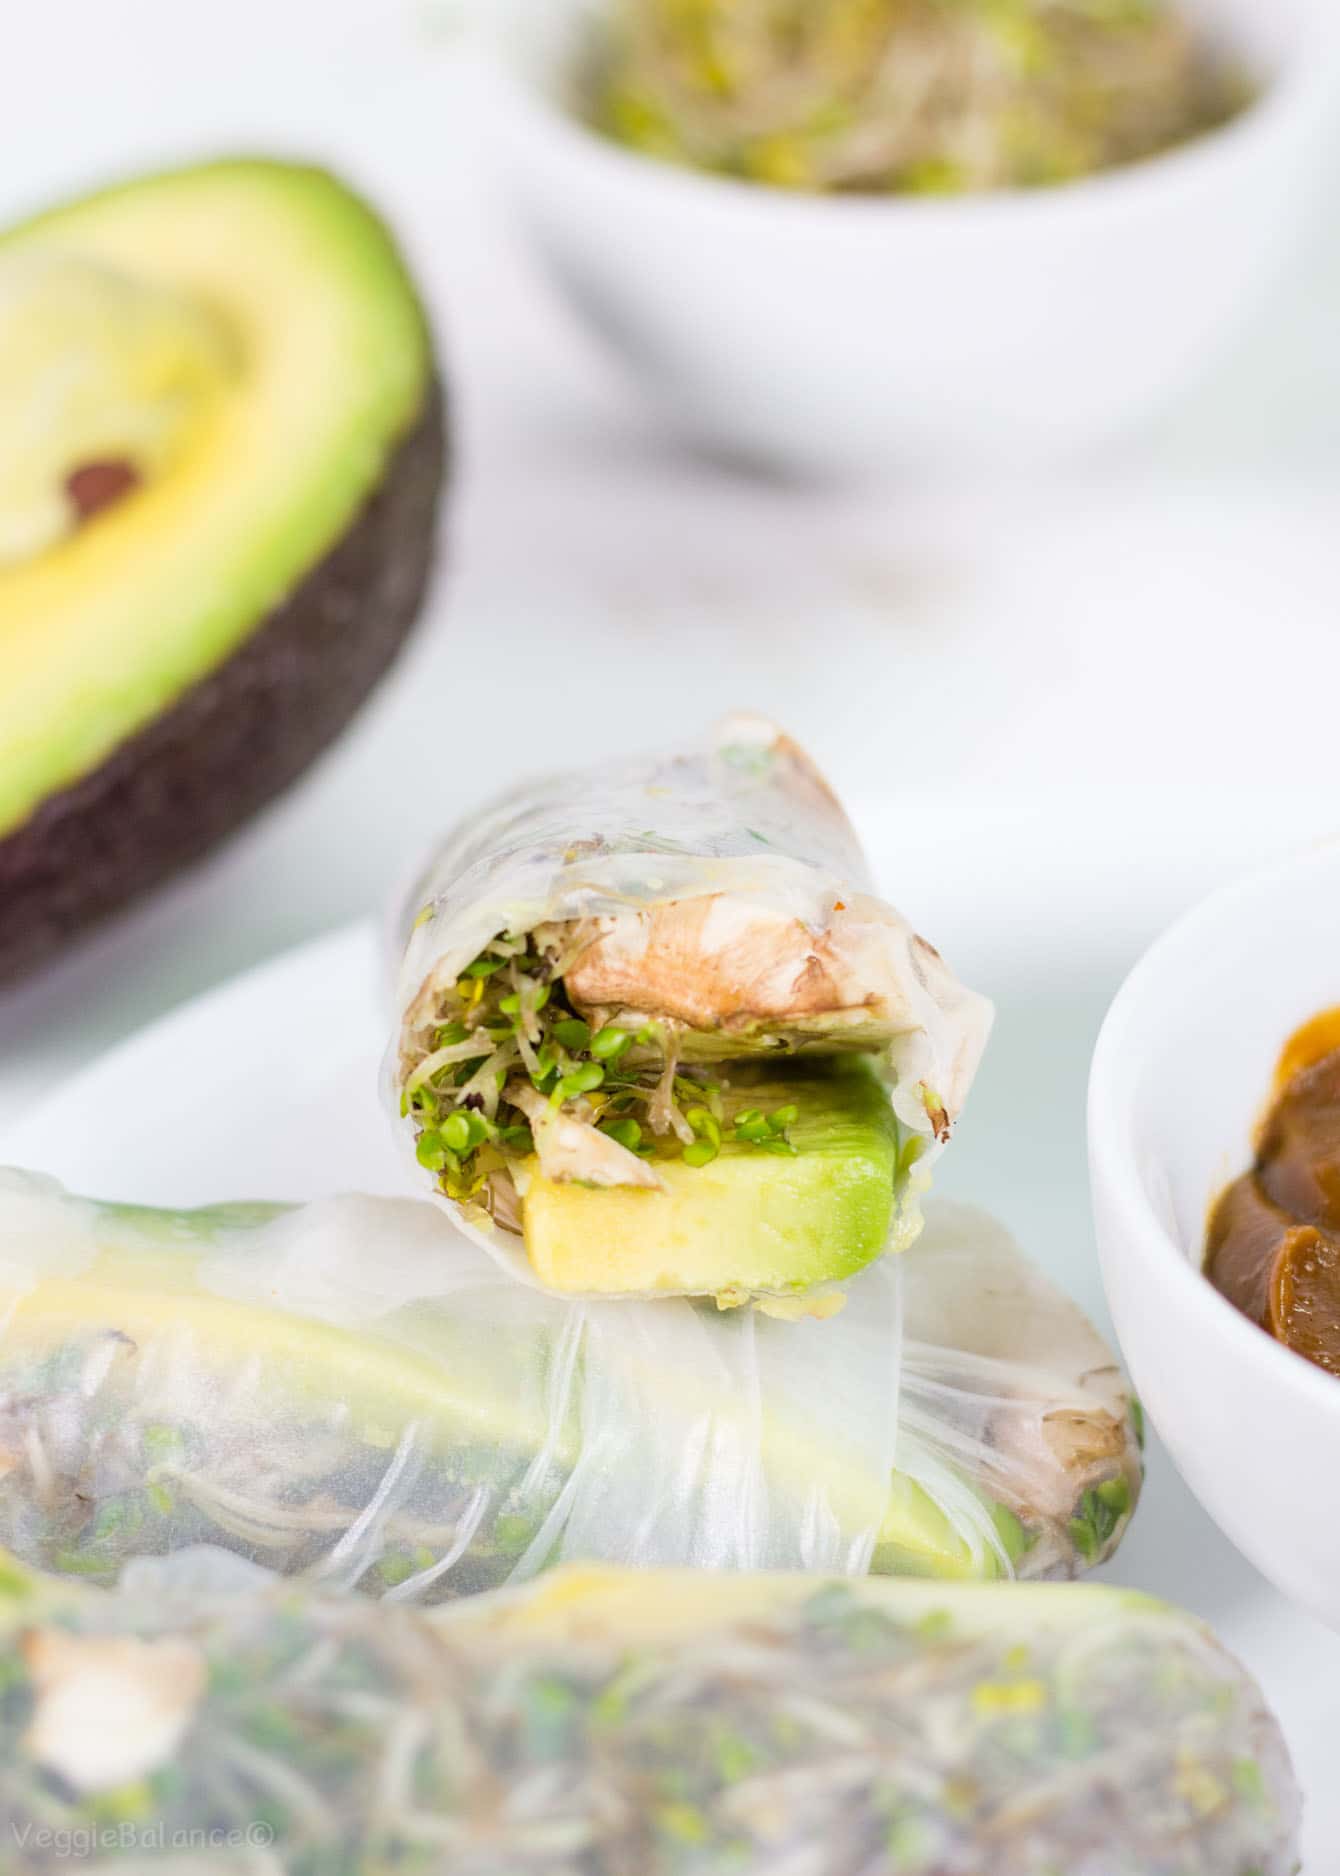 Fresh Spring Rolls with Avocado and Thai Peanut Dipping Sauce